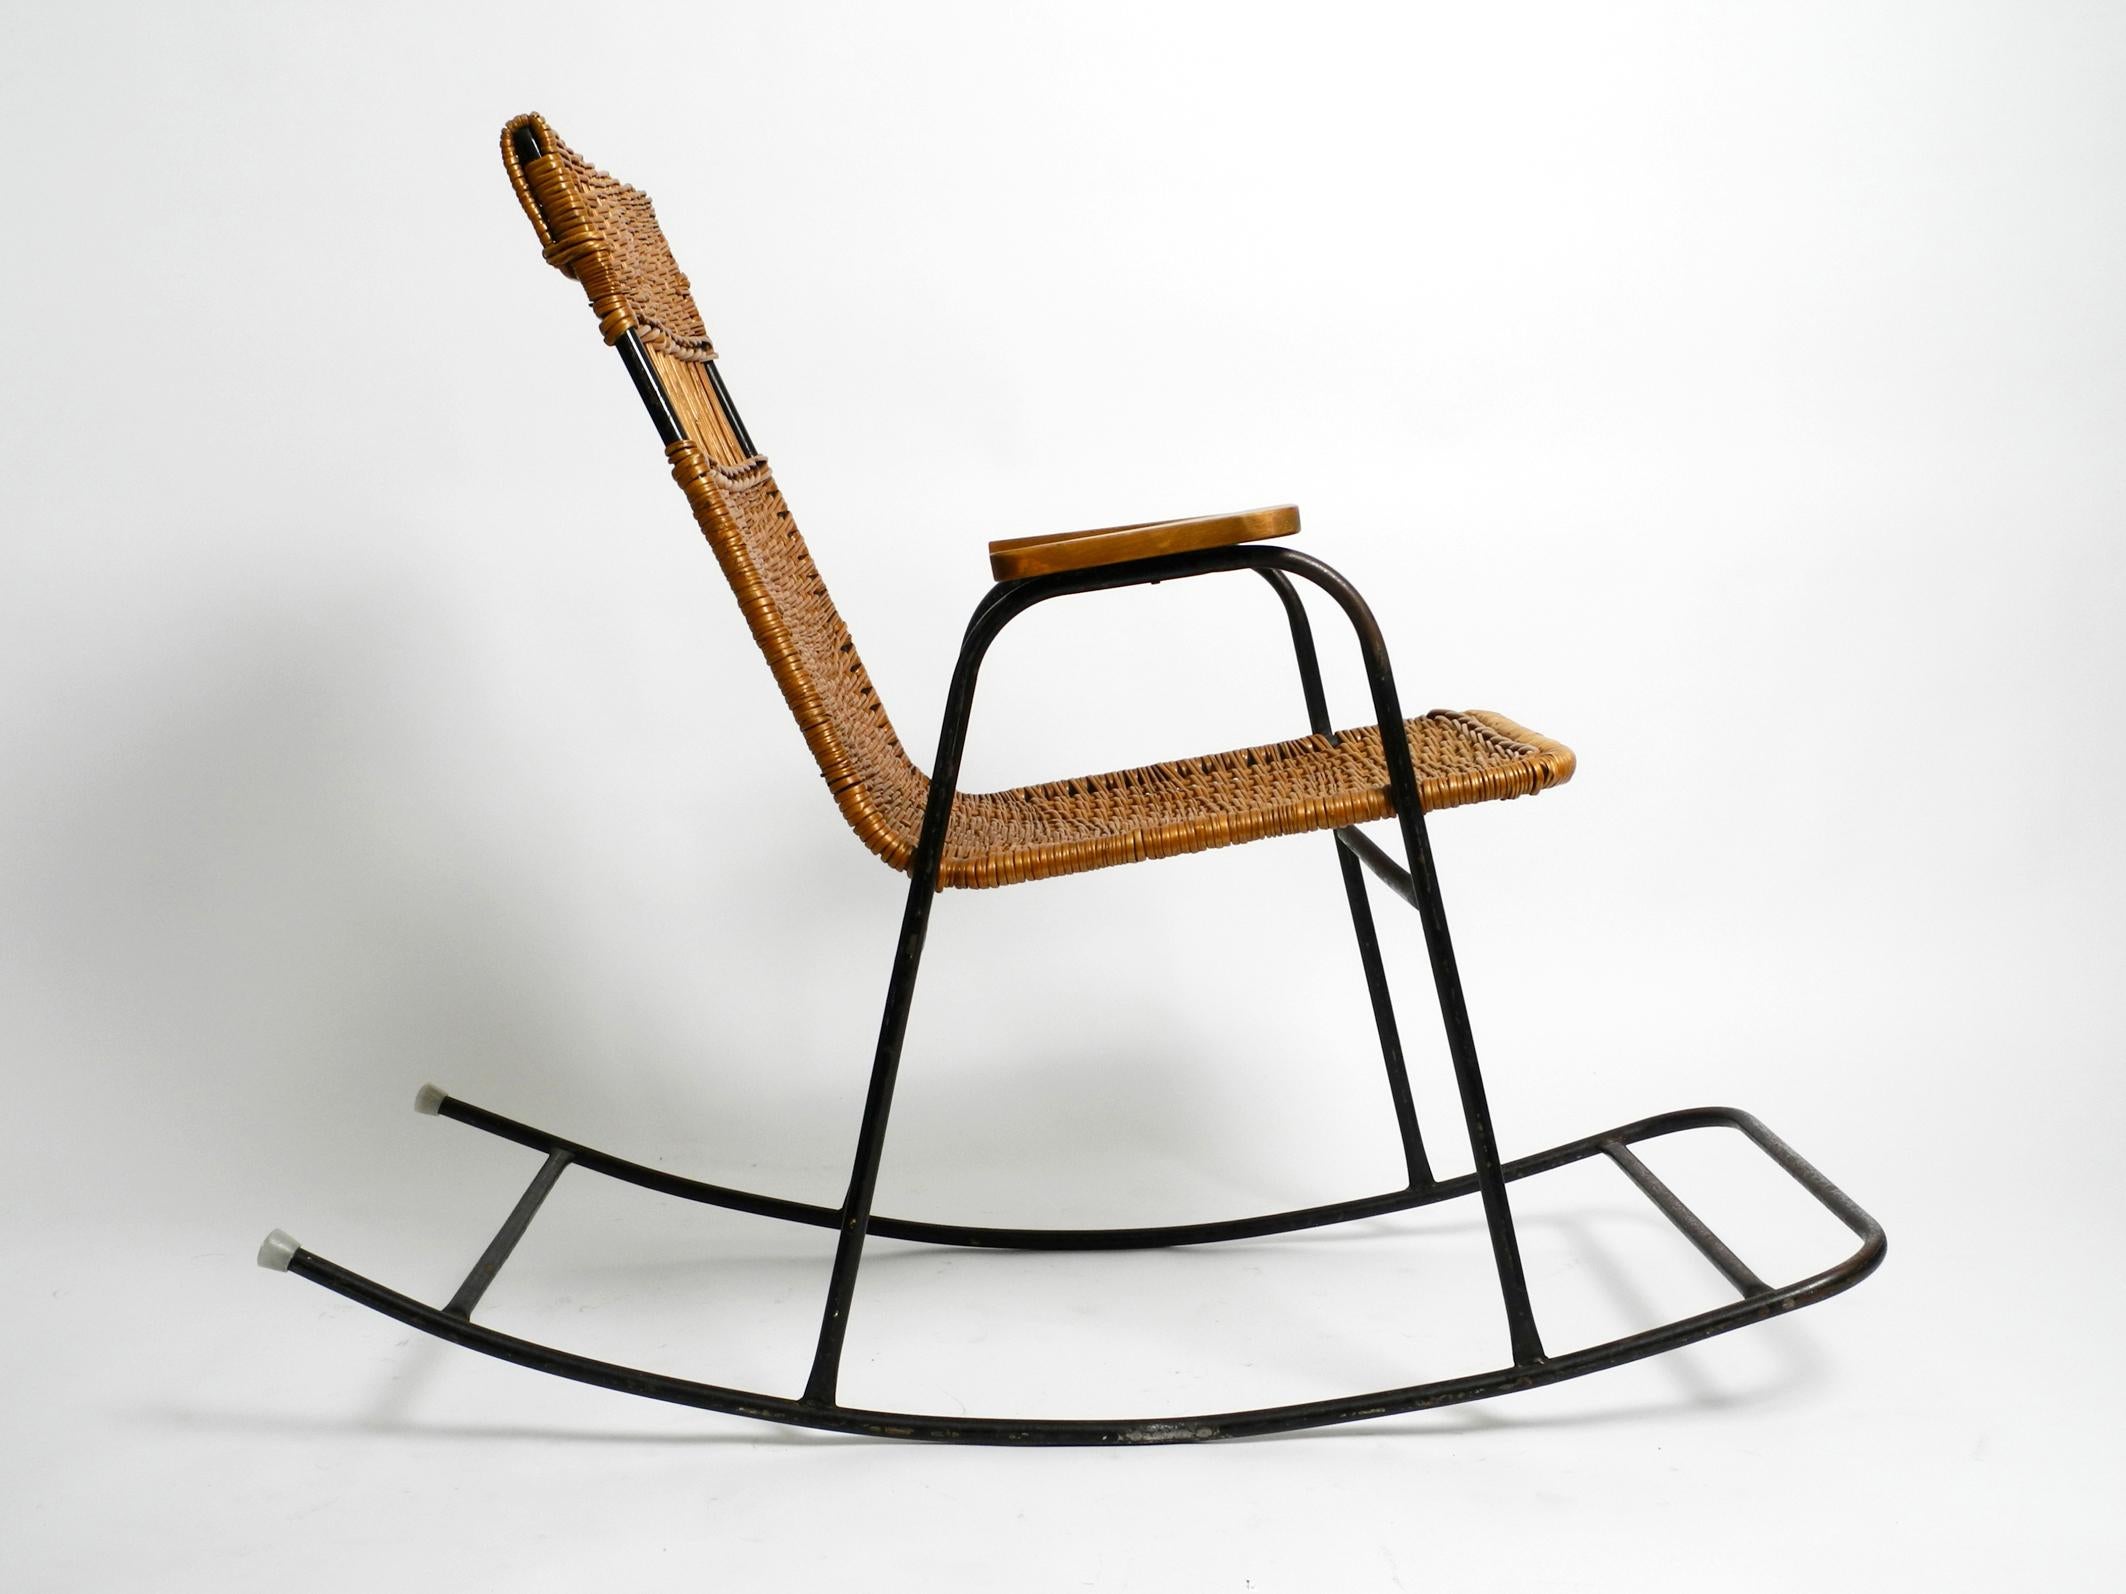 Beautiful Mid-Century Modern rocking chair with armrests made of black painted metal and rattan.
Typical 1950s design. Stunning beautiful piece.
Frame is entirely made of black lacquered iron. Seat with backrest are made of rattan weave.
Solid